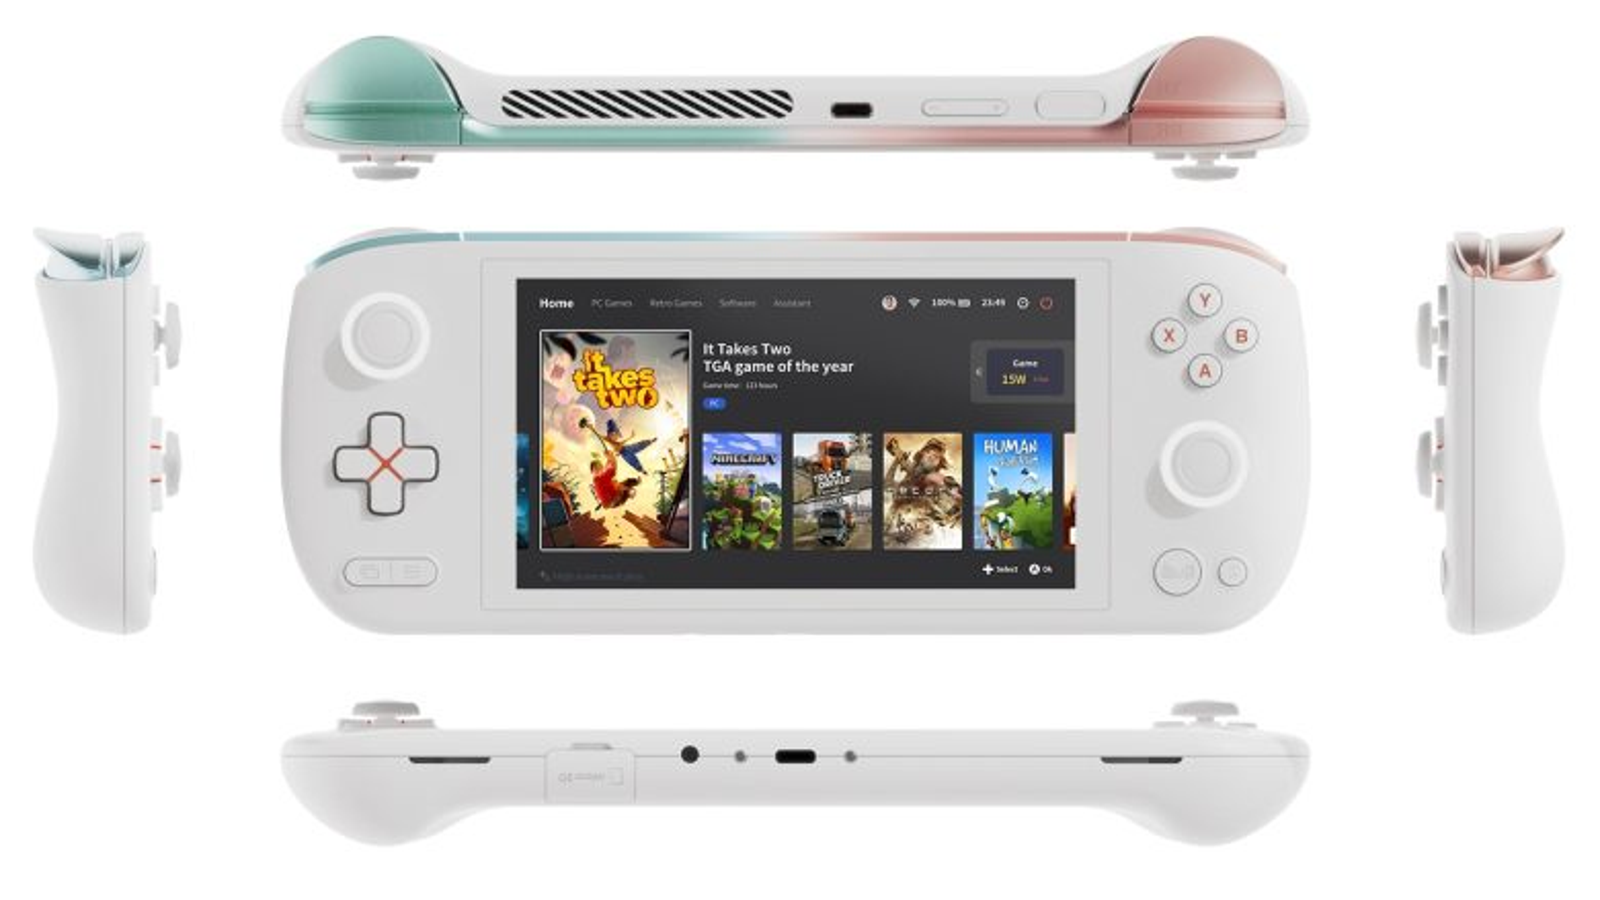 Your Steam Deck Can Now Double as a Wii U GamePad